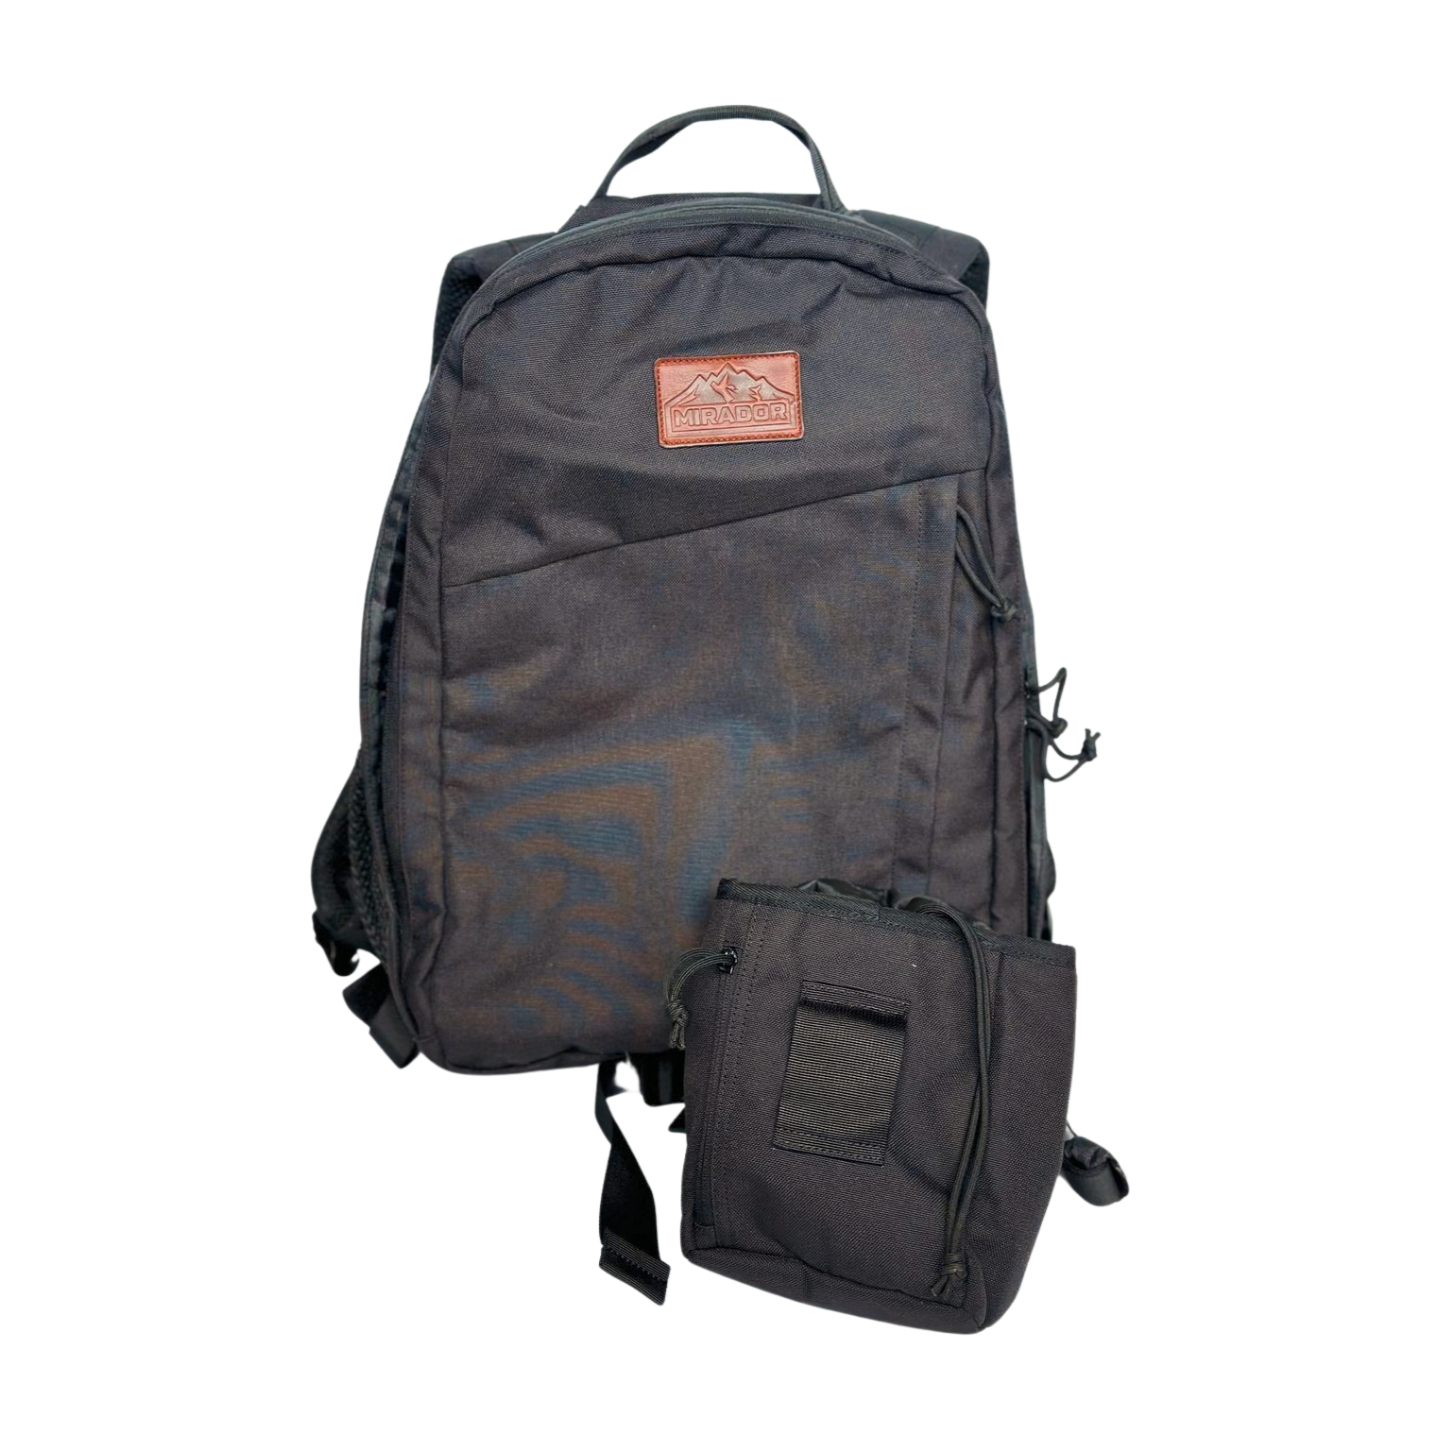 Mirador Ruckpack Bundle (Backpack + Weight + Treat Pouch)